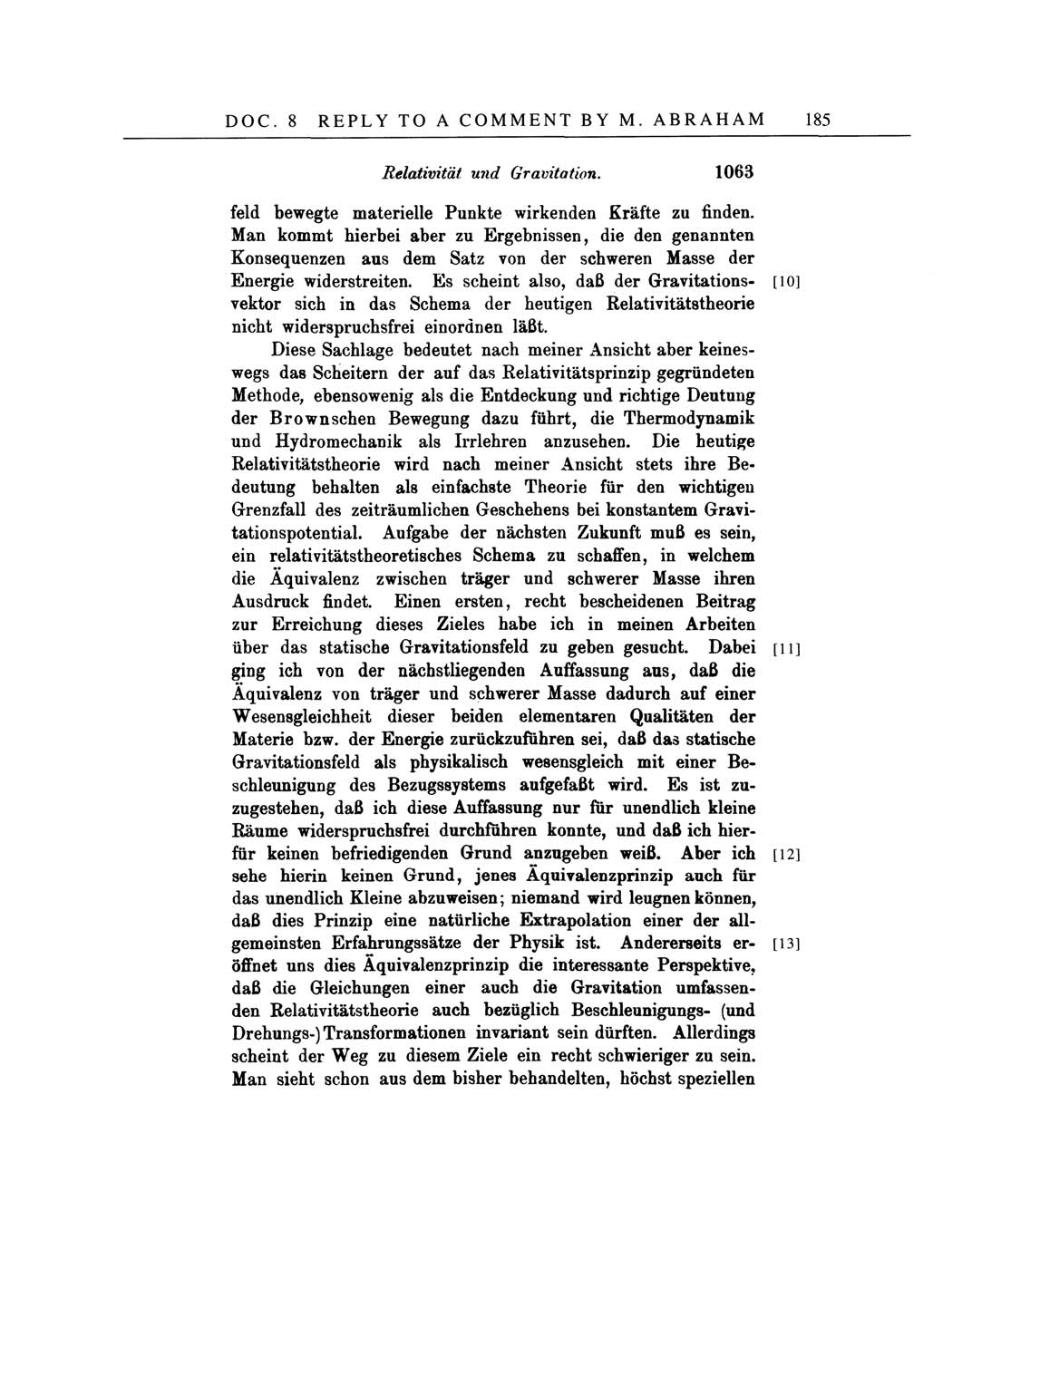 Volume 4: The Swiss Years: Writings 1912-1914 page 185